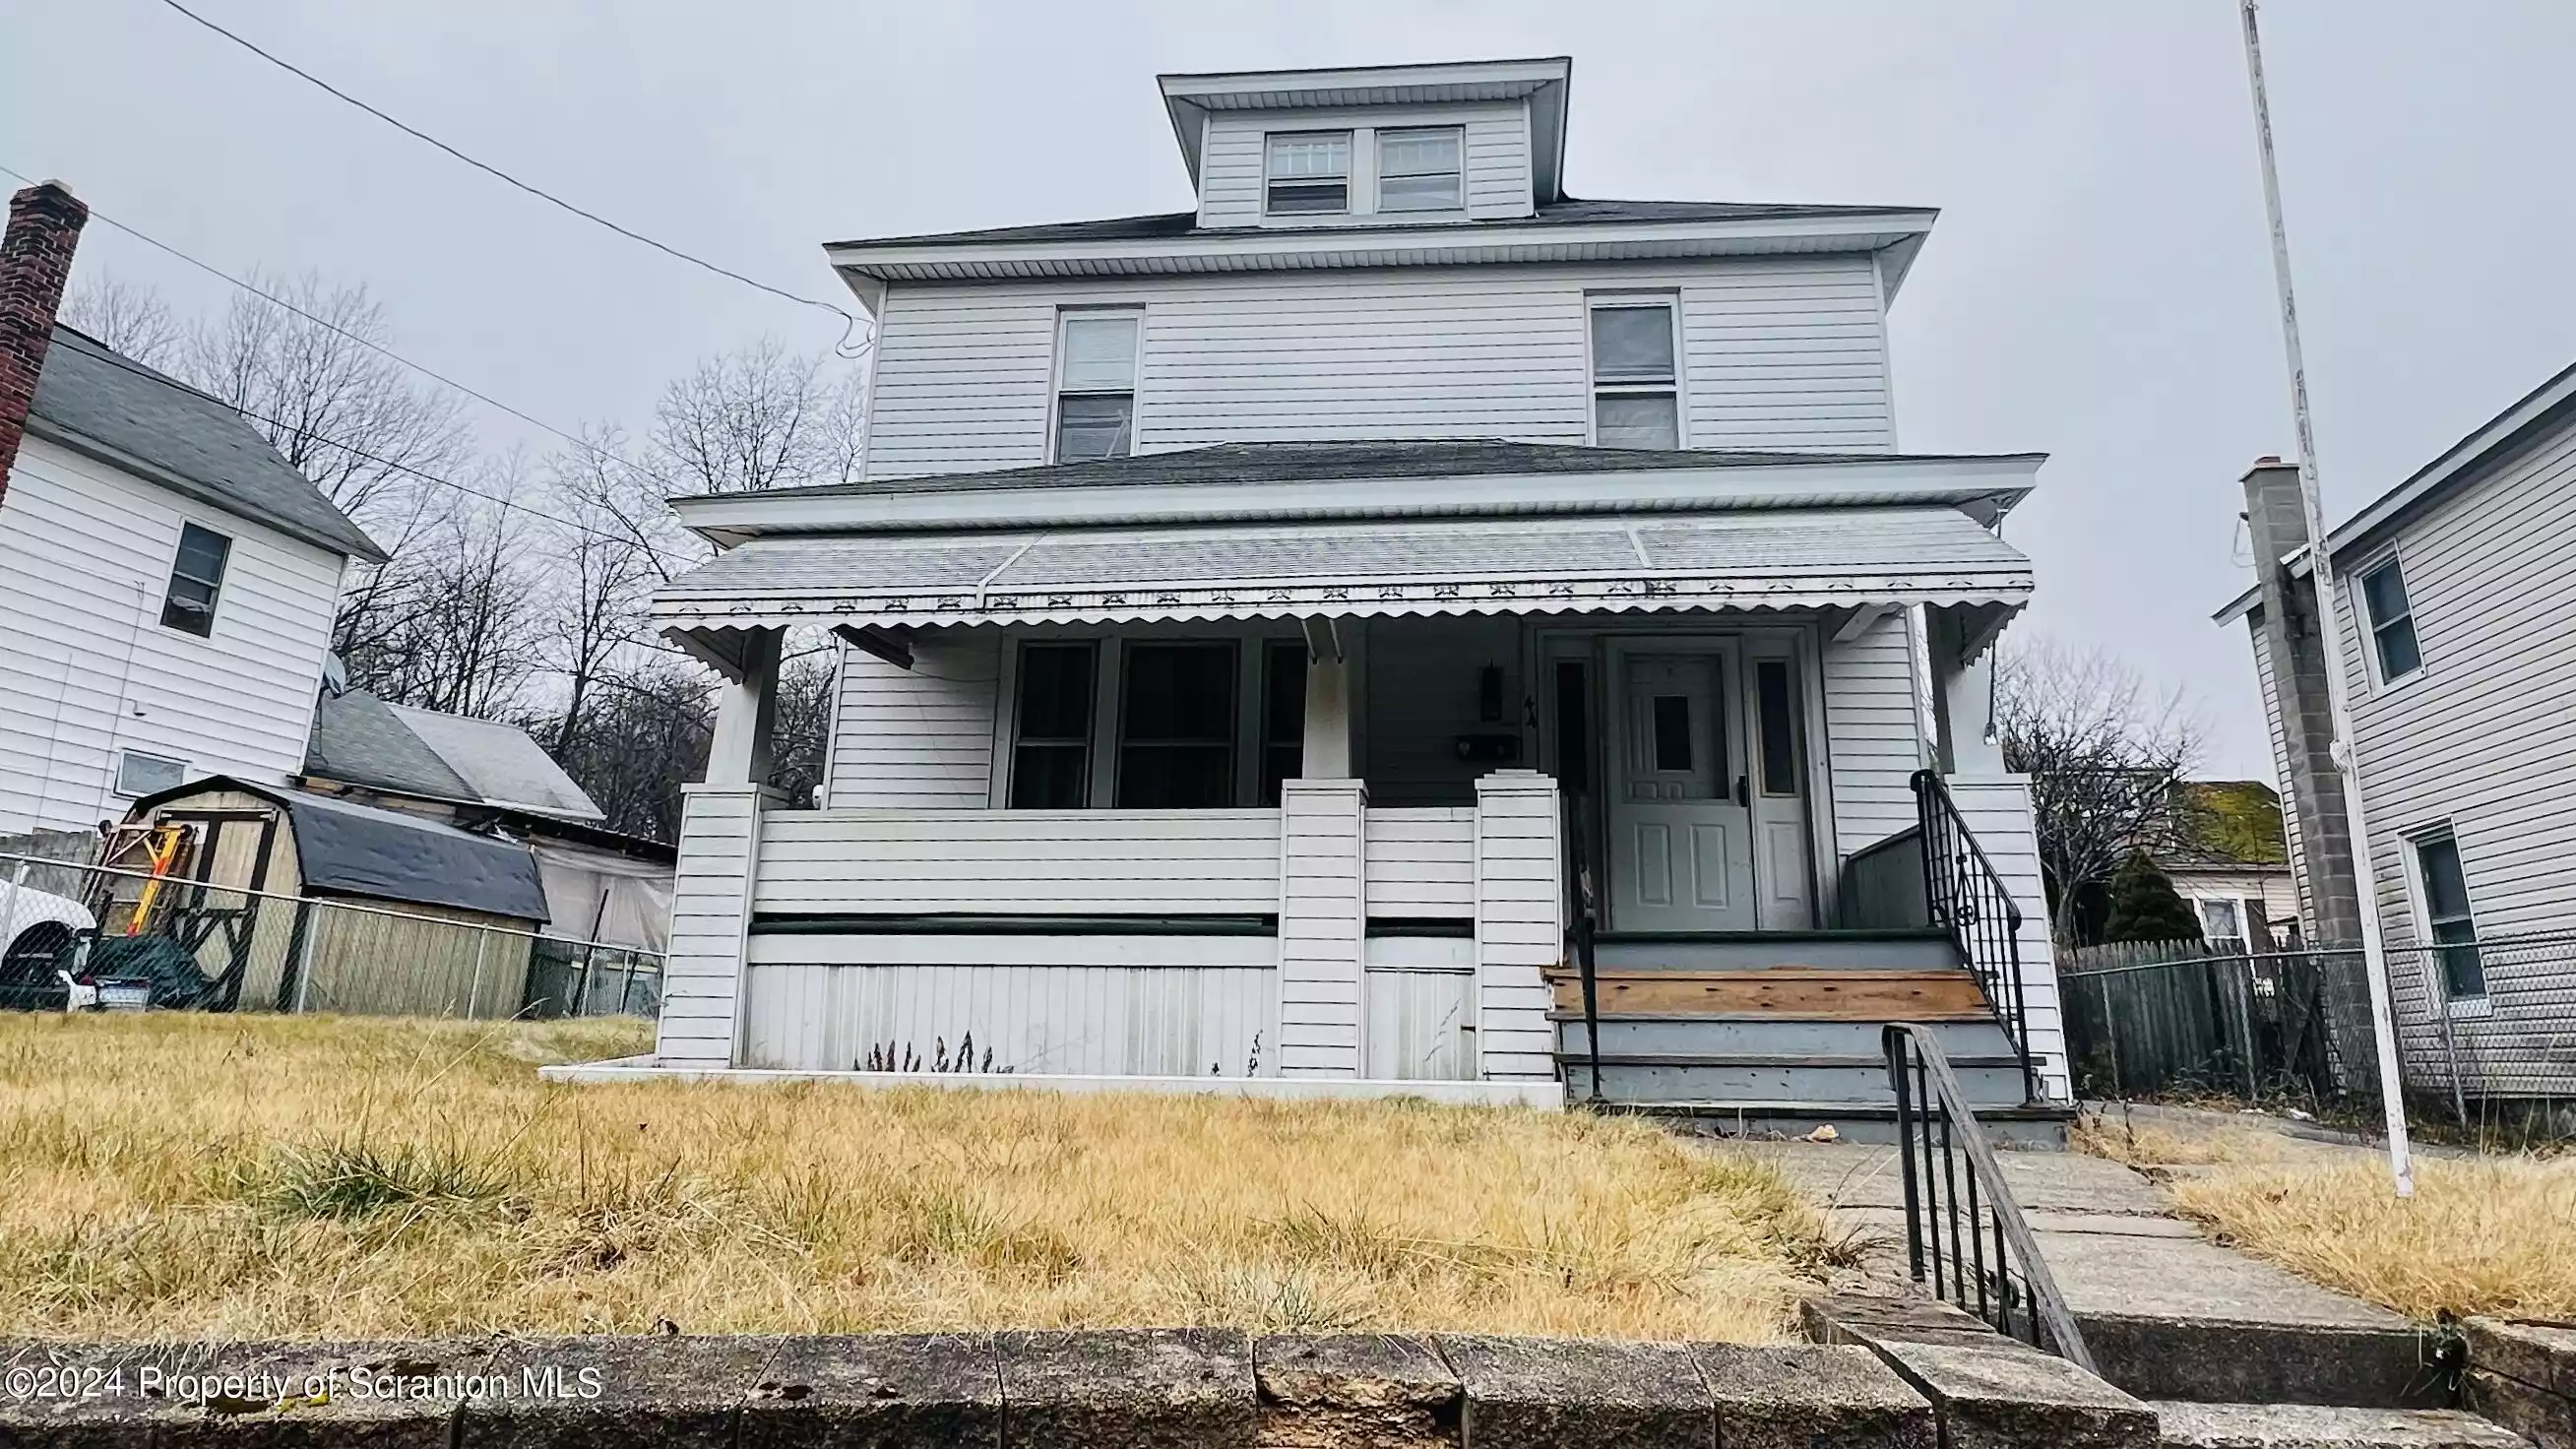 44 Upper Powderly Street, Carbondale, Pennsylvania 18407, 6 Rooms Rooms,2 BathroomsBathrooms,Residential,For Sale,Upper Powderly,GSBSC556